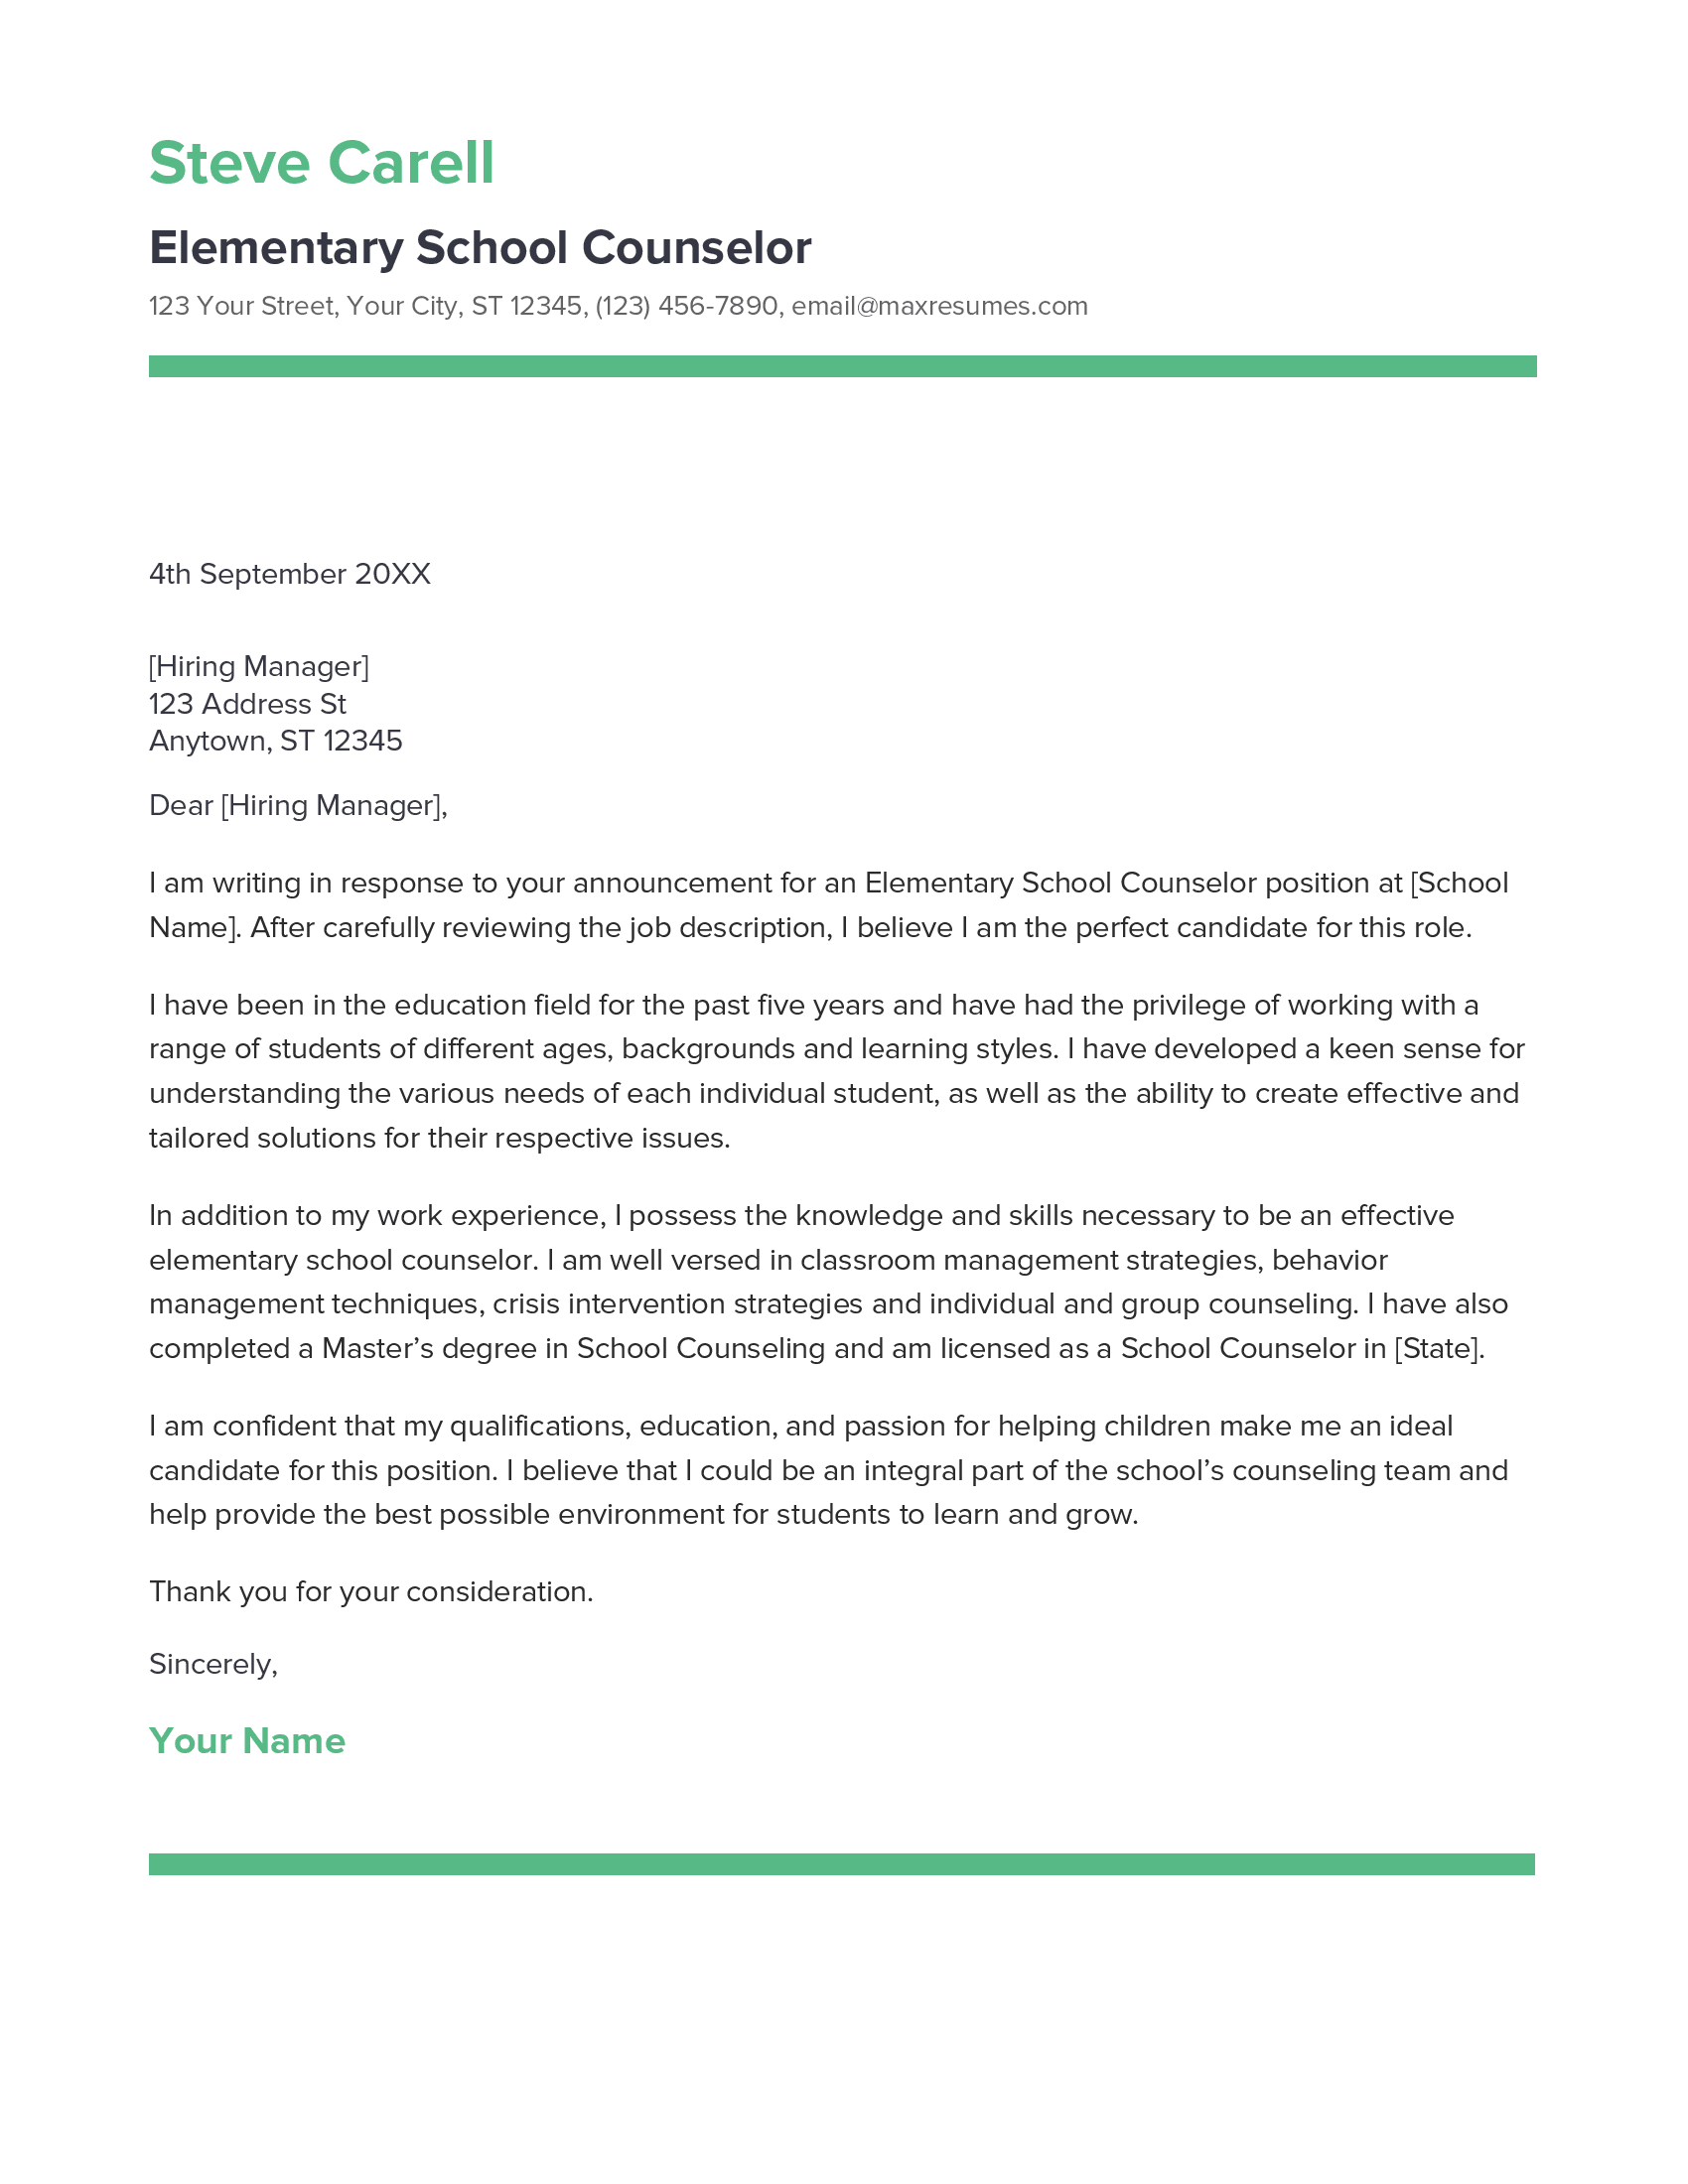 Elementary School Counselor Cover Letter Example